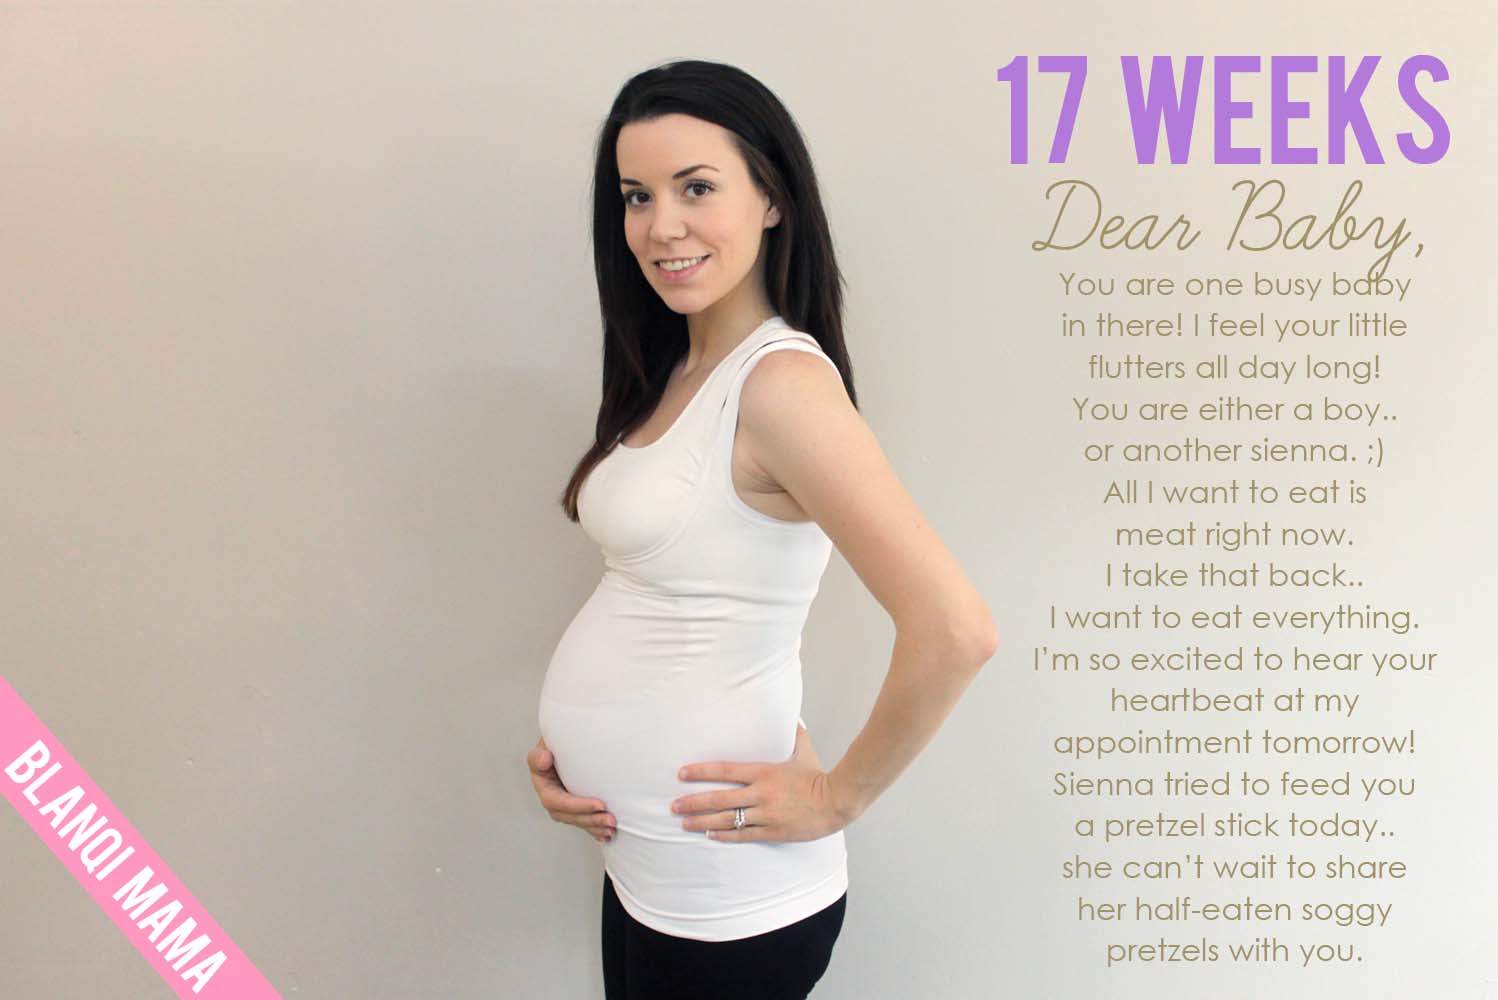 Is My Baby Fully Developed At 17 Weeks?